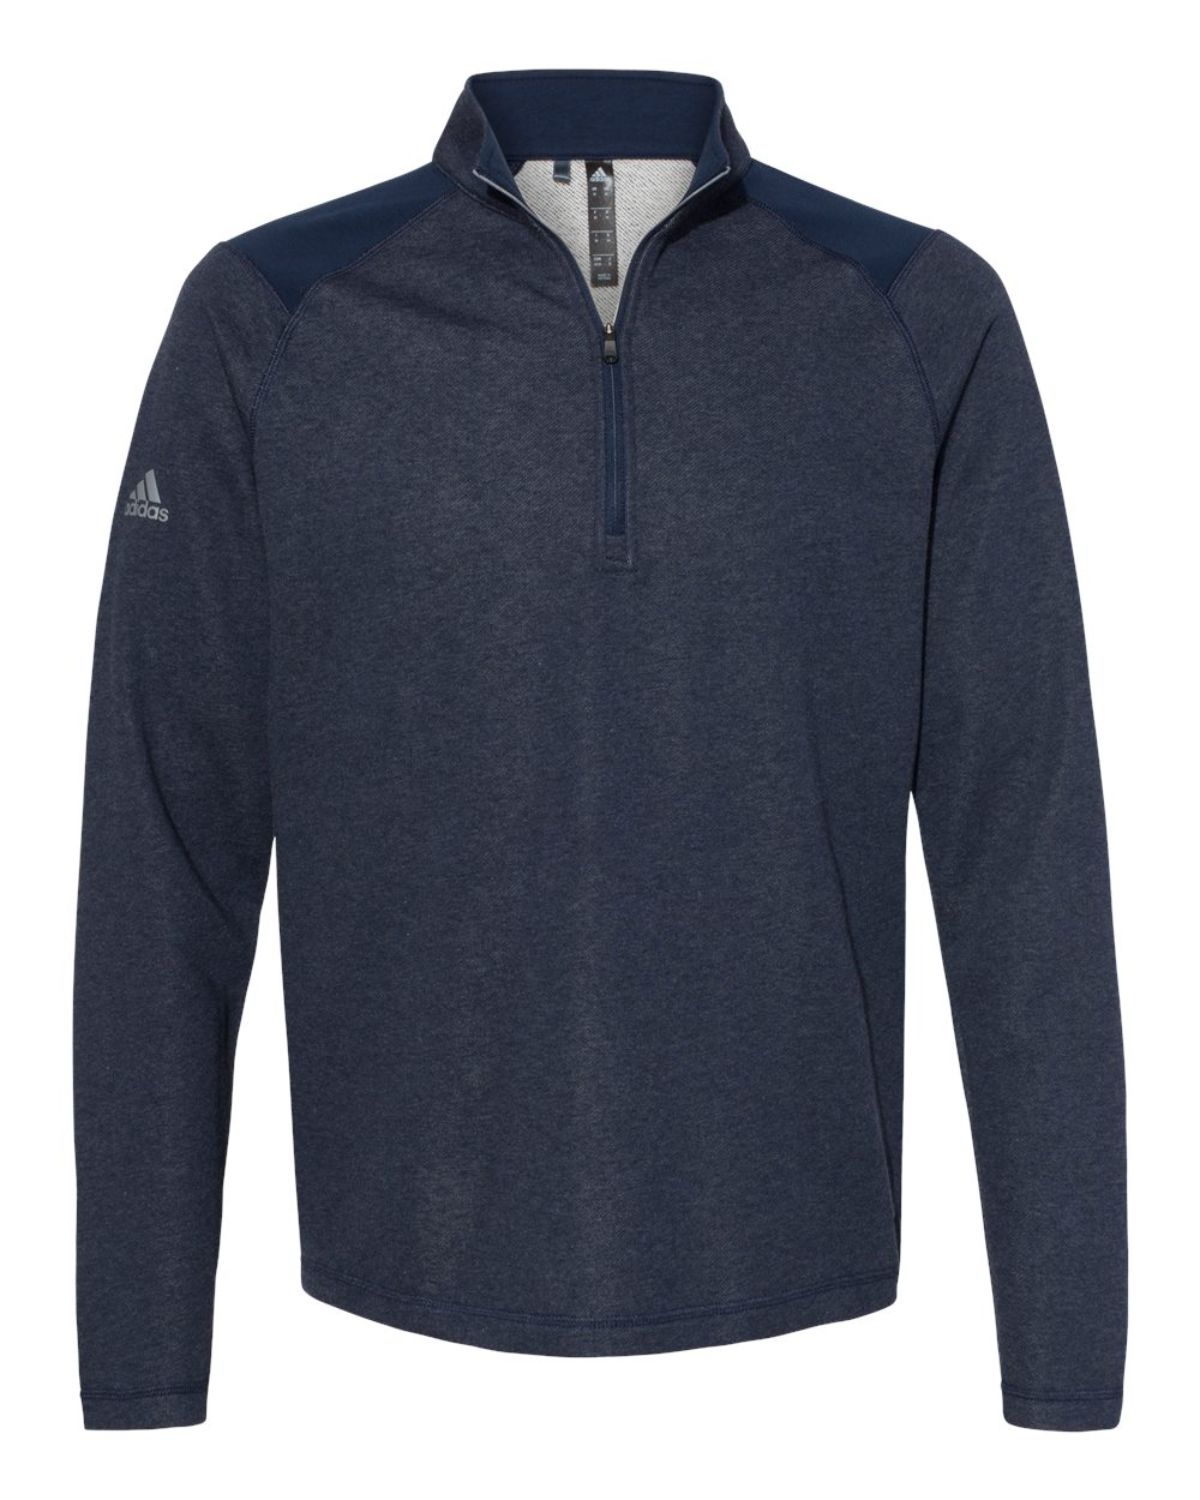 Adidas Golf A463 Heathered Quarter-Zip Pullover with Colorblocked Shoulders